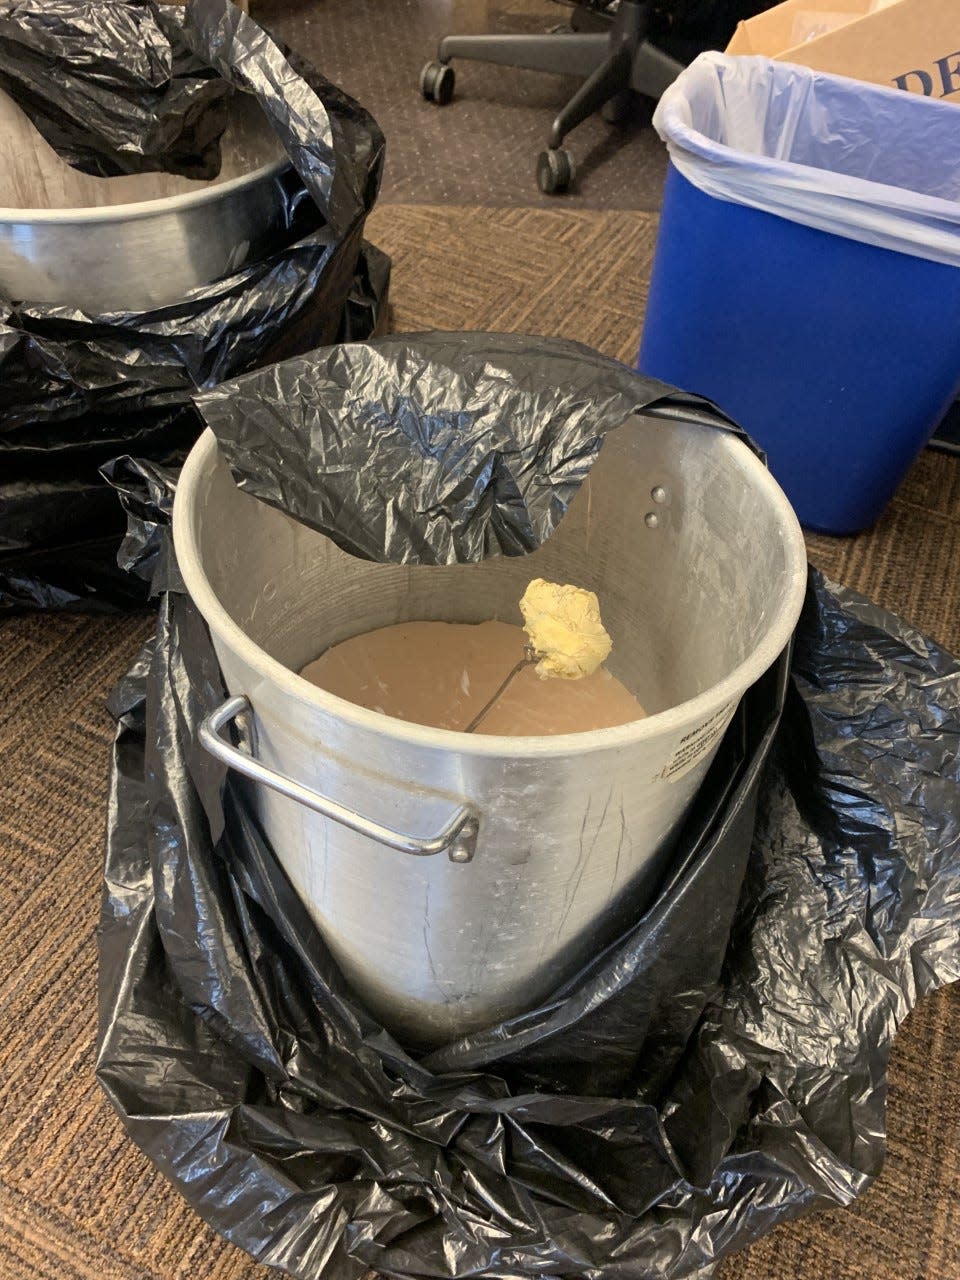 Traffickers used these buckets to melt wax and extract meth hidden in candles.